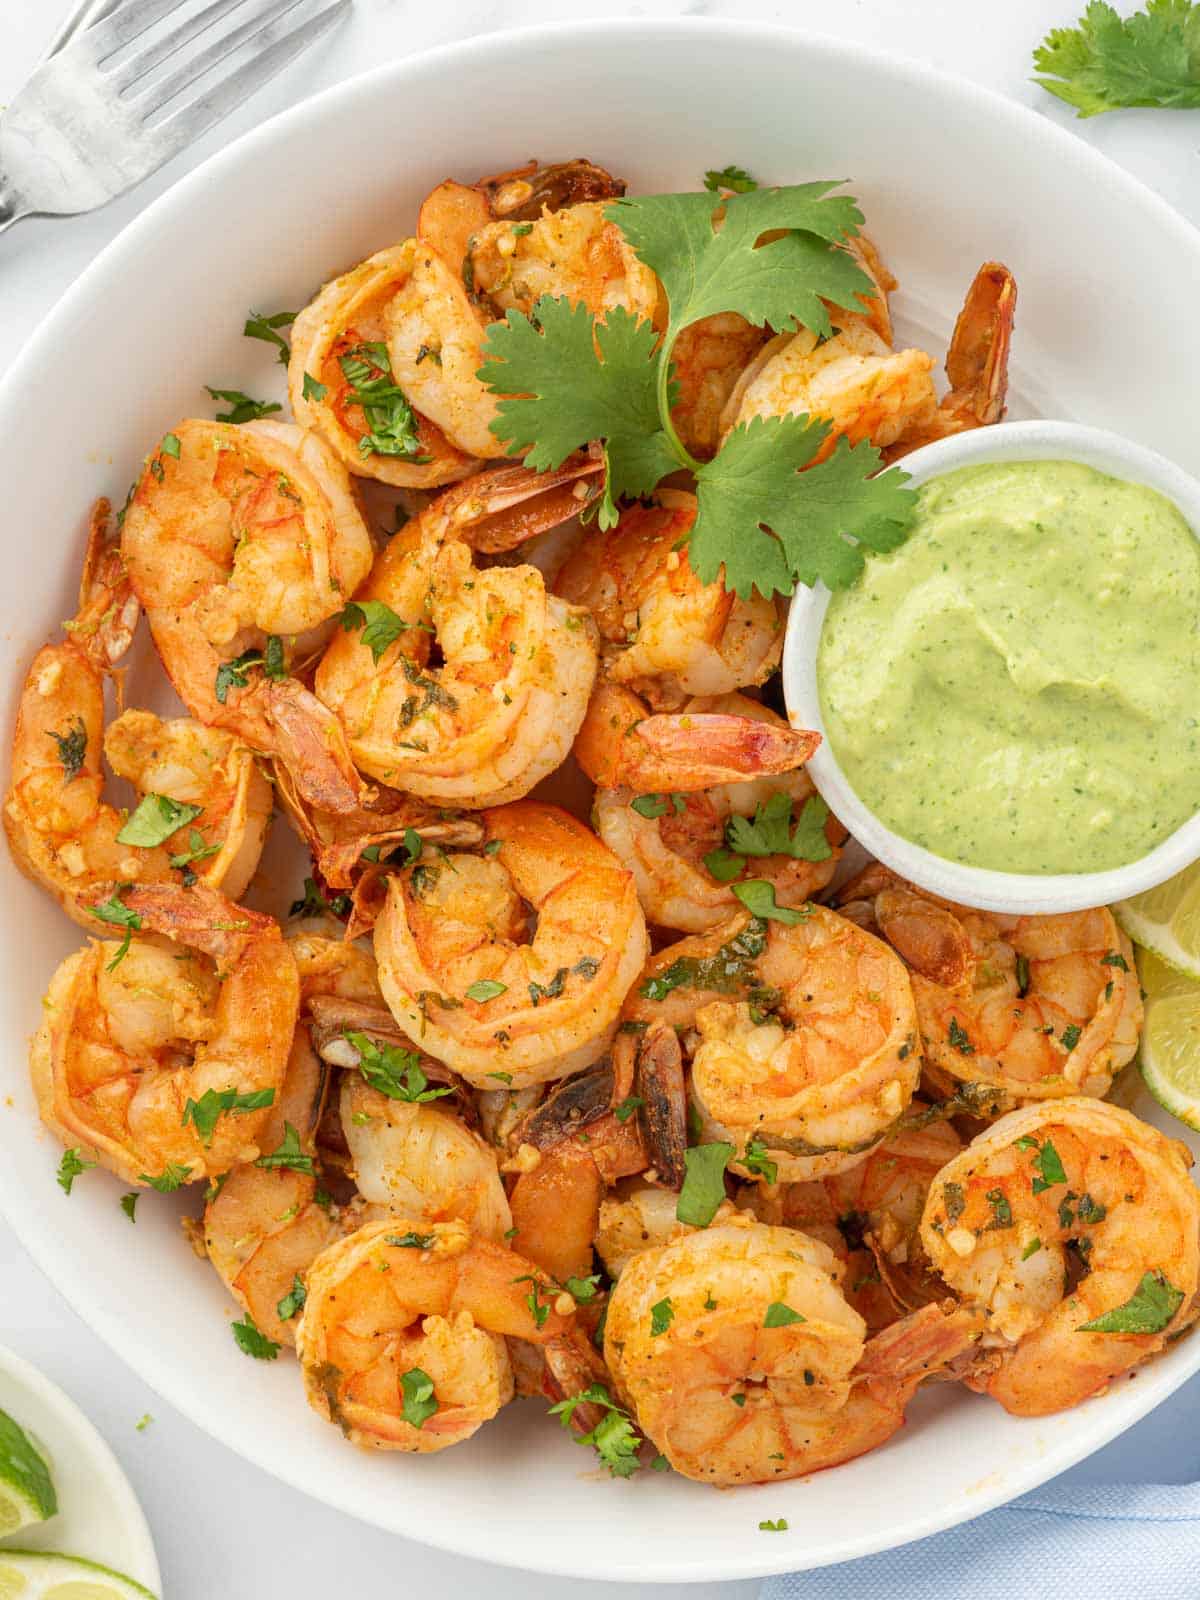 Chili lime shrimp in a serving bowl with green aioli for dipping.